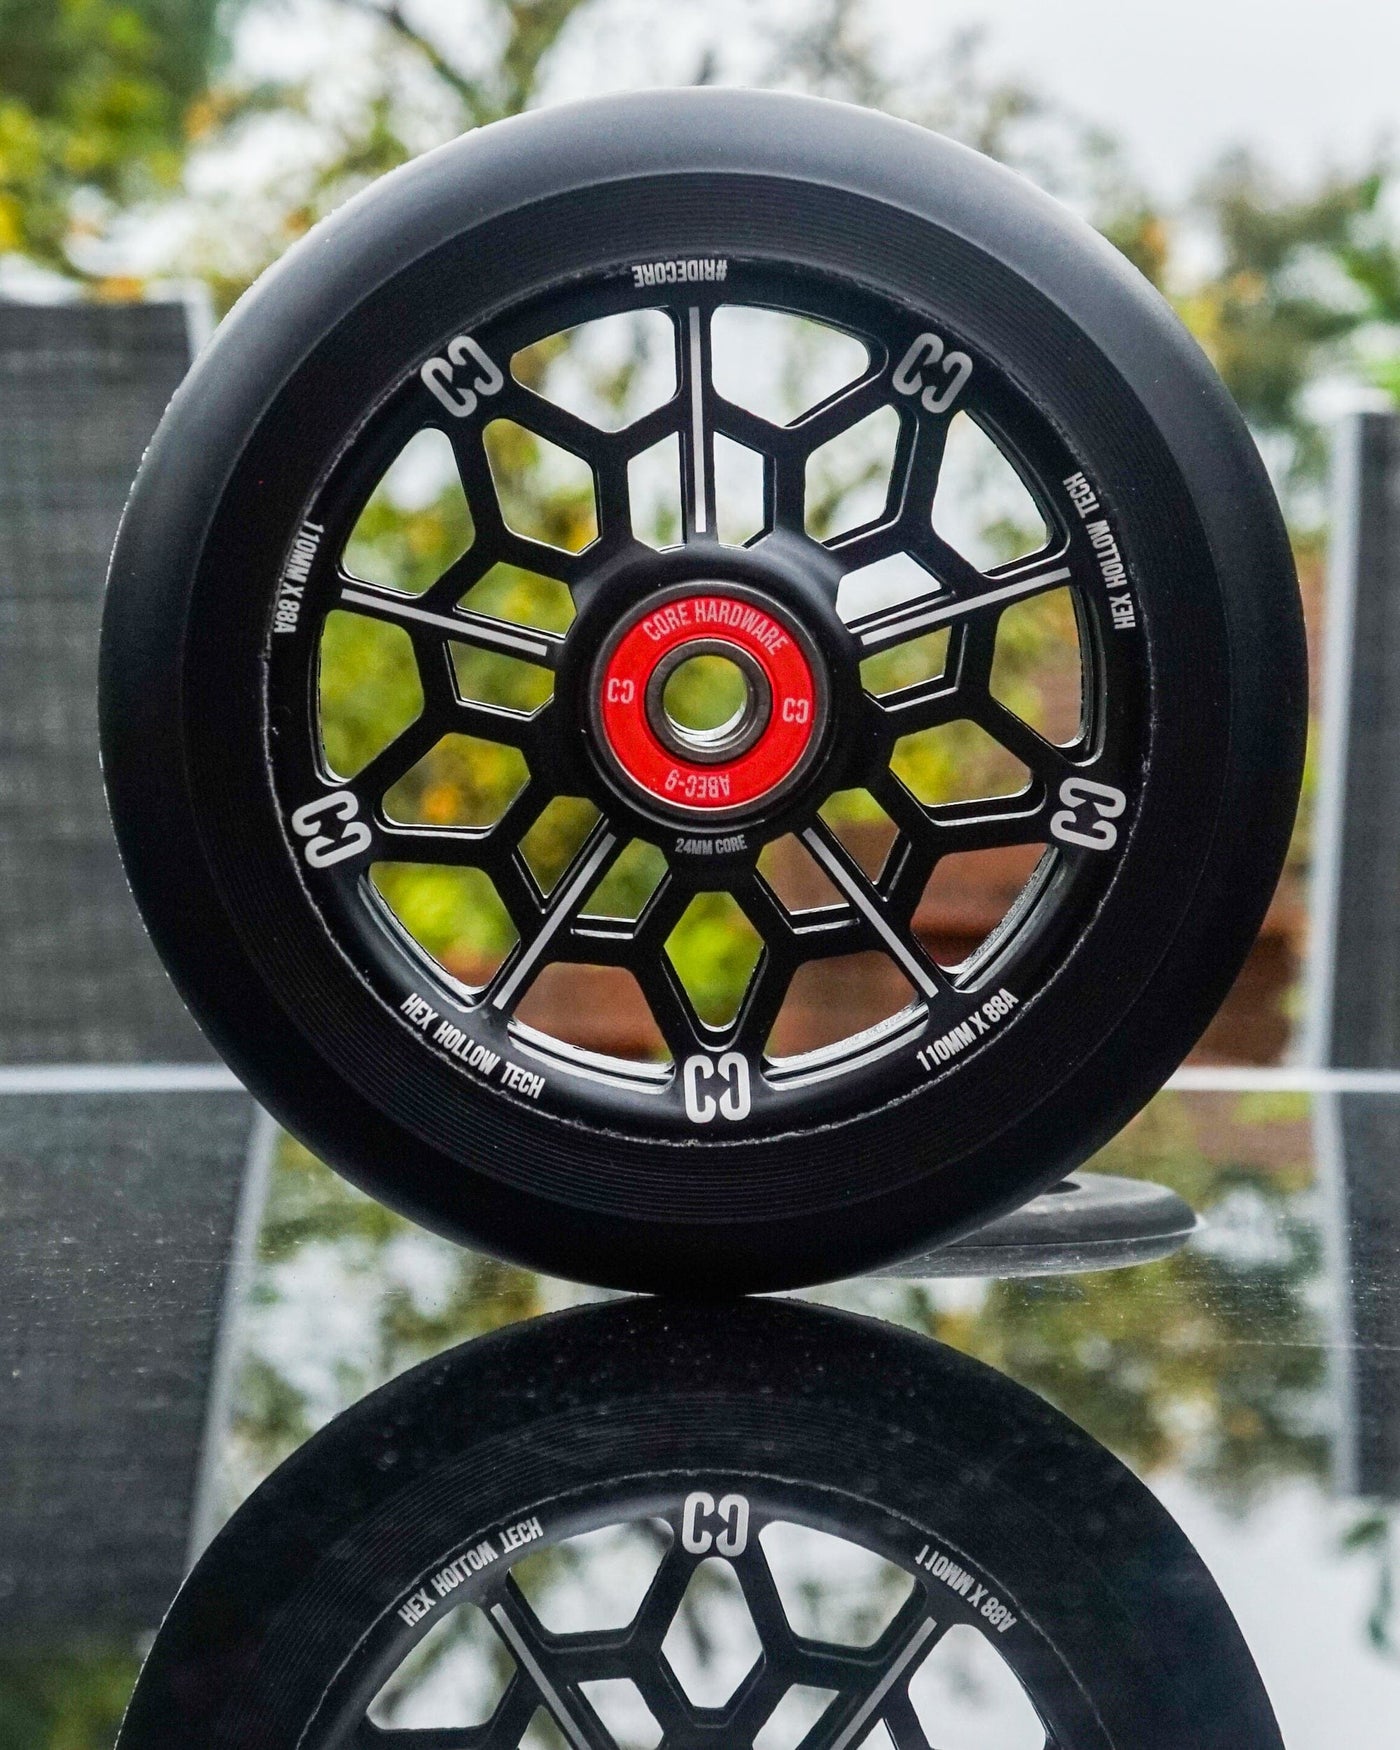 CORE Hex Hollow Stunt Black Scooter Wheel 110mm I Scooter Wheel Balance